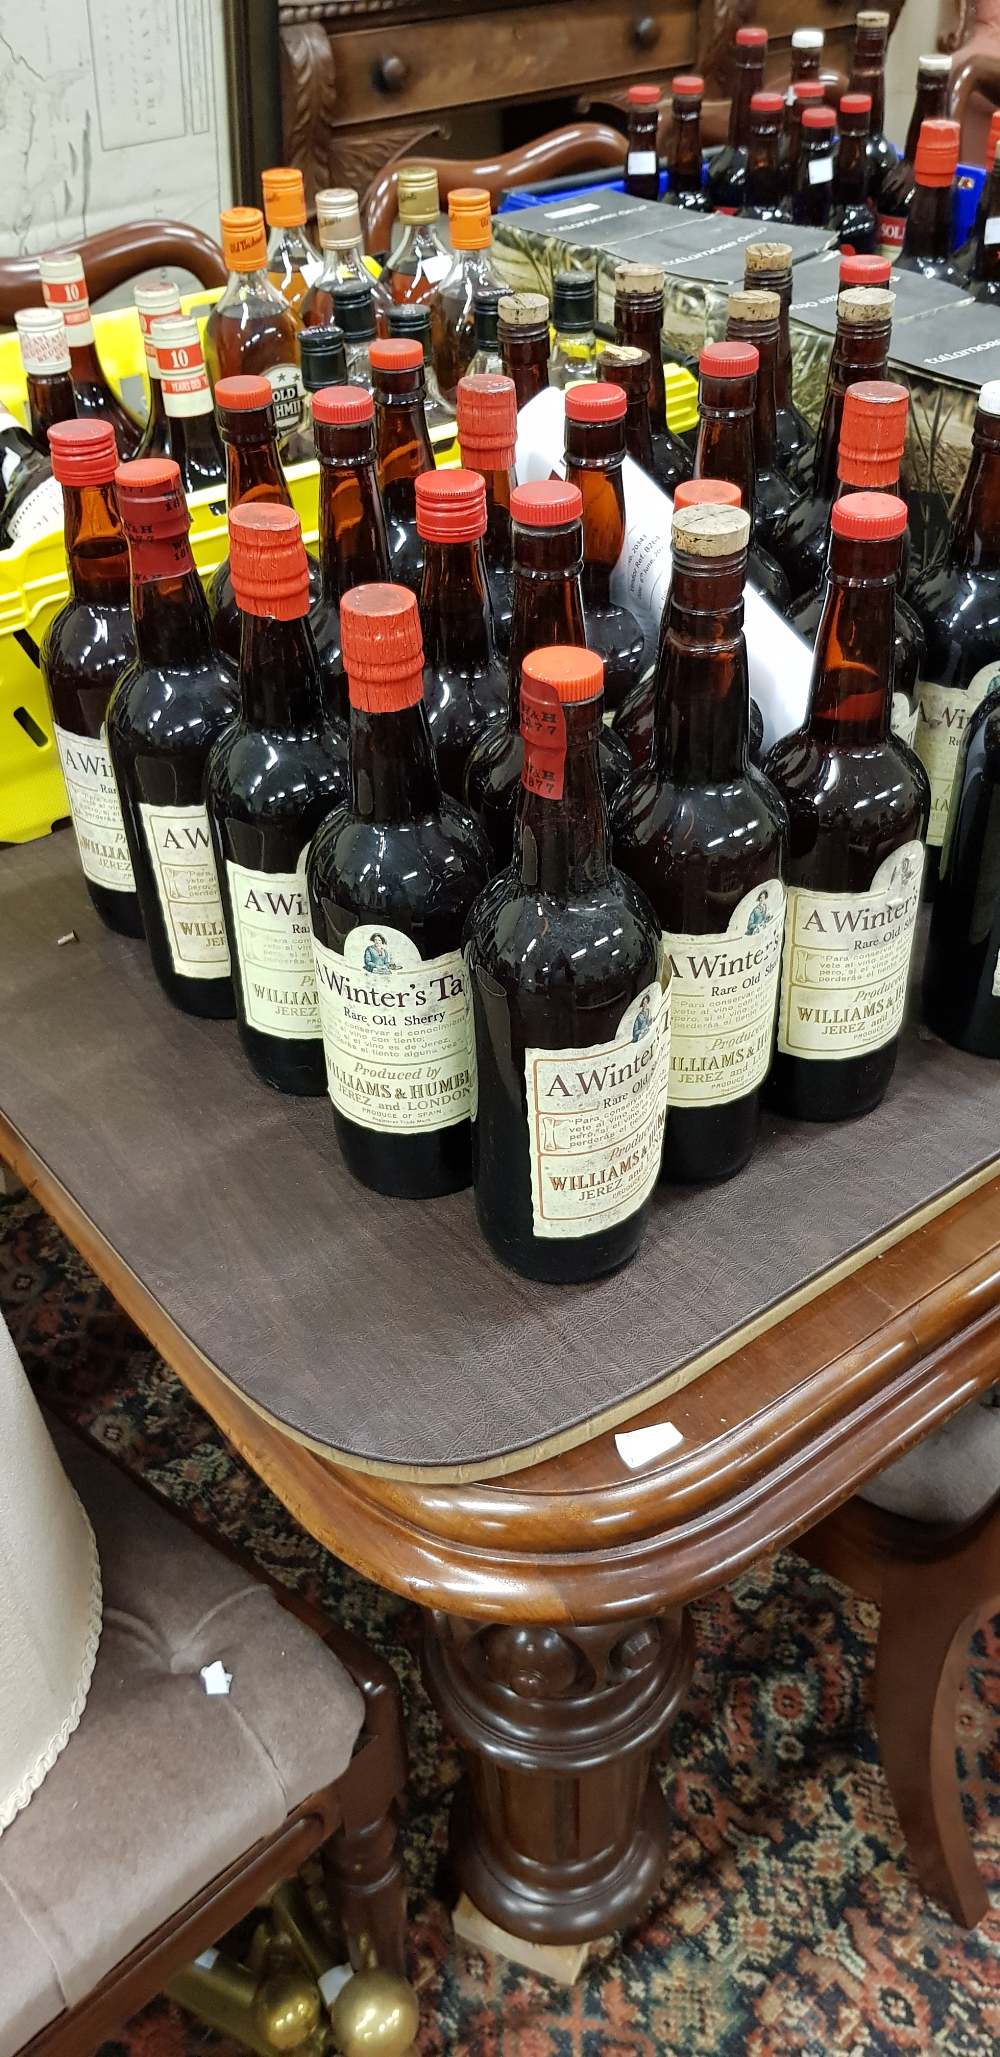 Winters Tale Rare Old Sherry, distributed by Williams and Humbert, approx. 35 bottles.